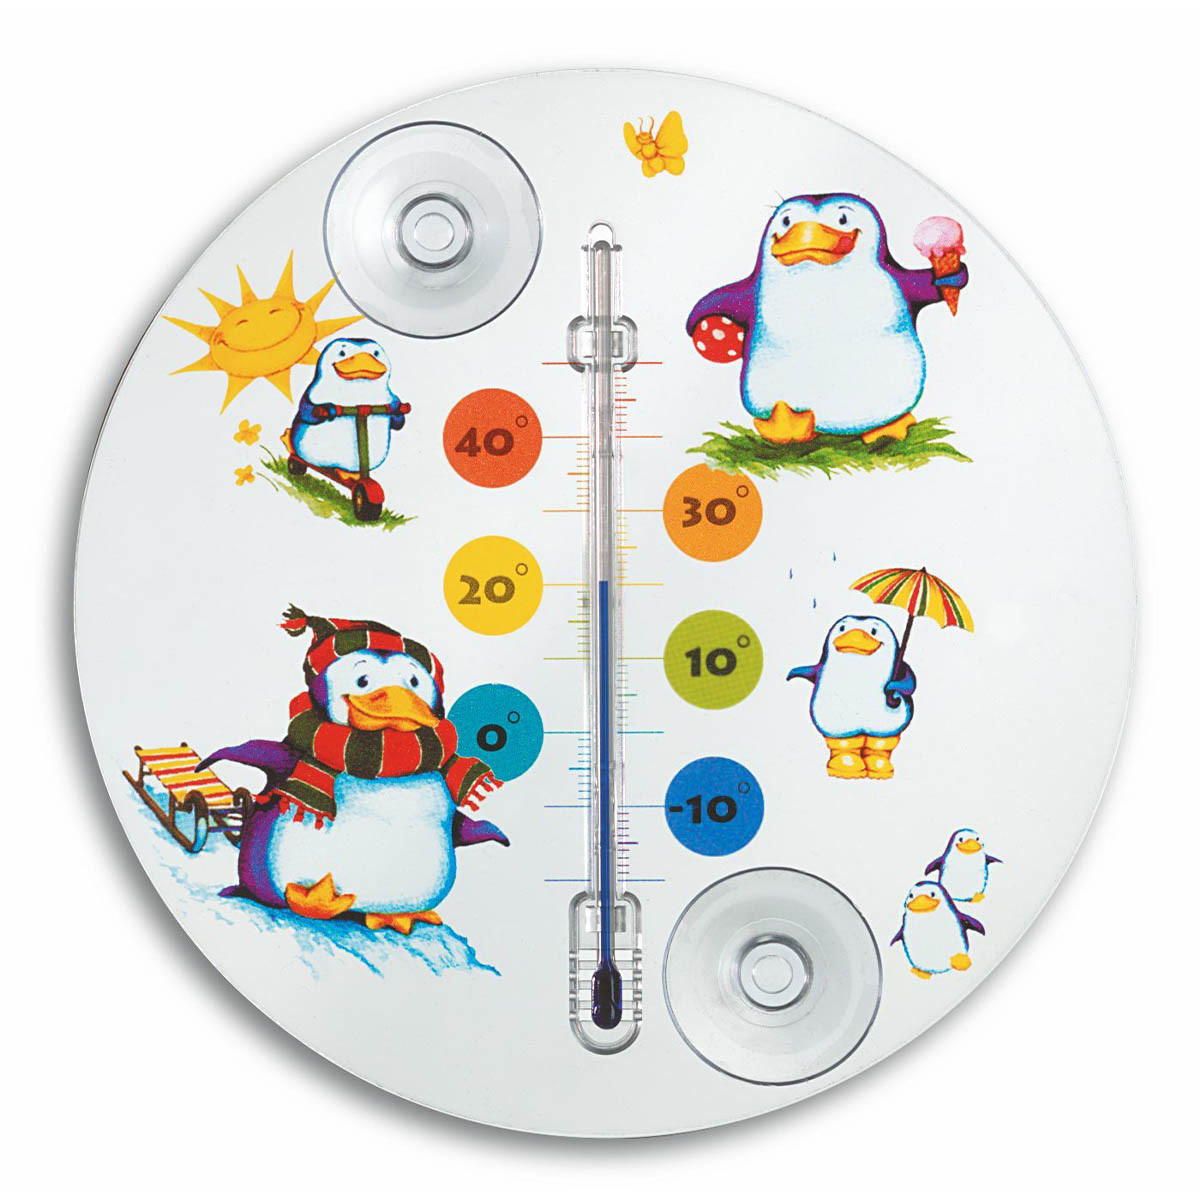 14-6016-20-analoges-fensterthermometer-pinguin-1200x1200px.jpg